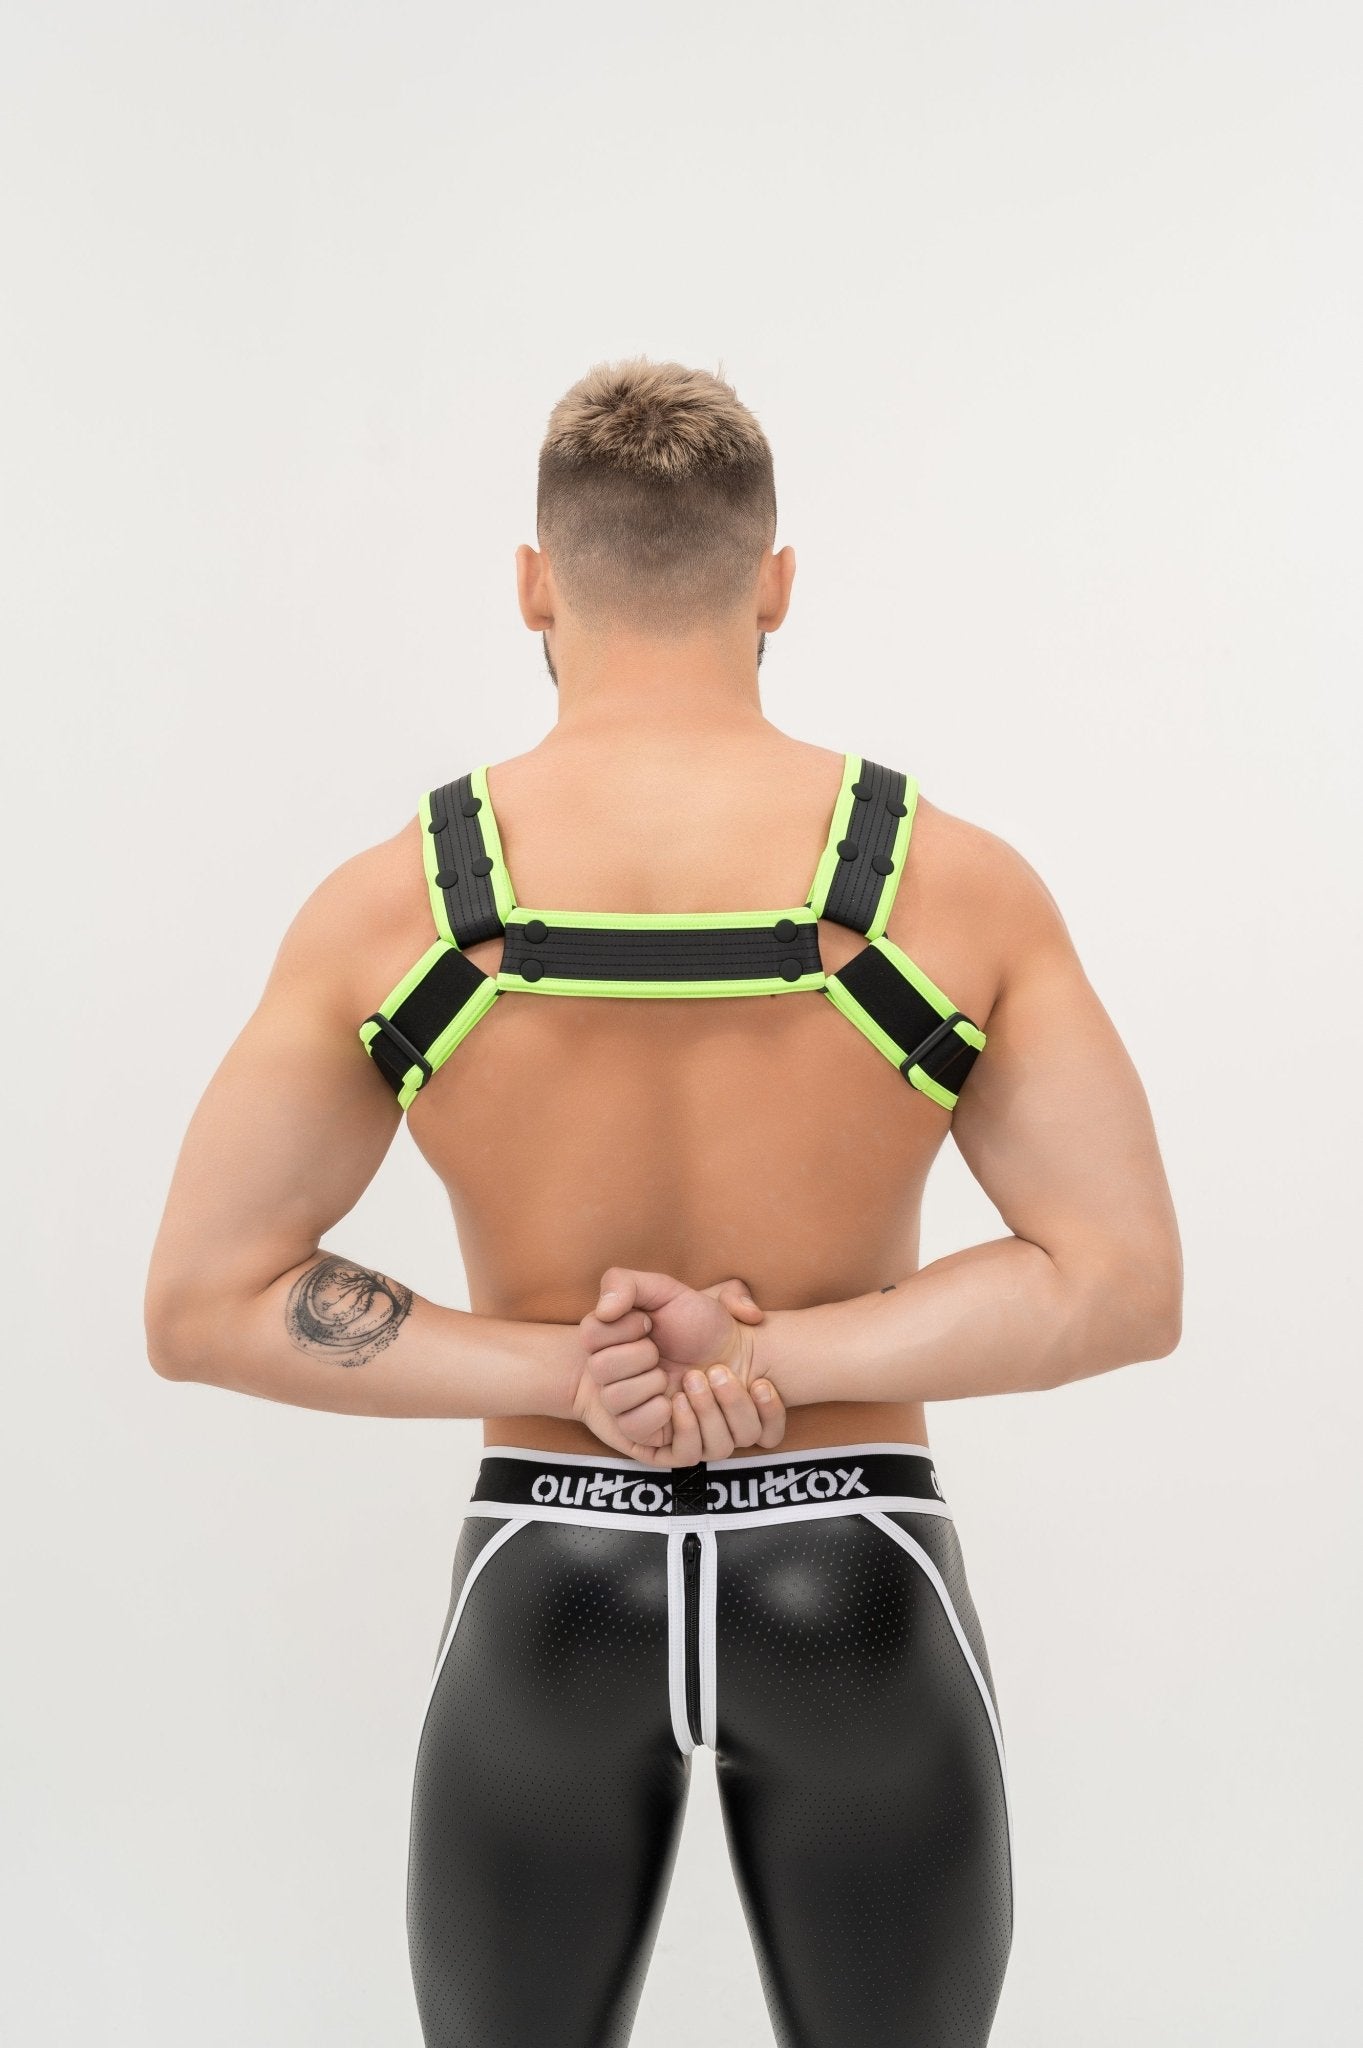 Outtox Bulldog Harness with C-Ring and Snaps - Jockstraps.com